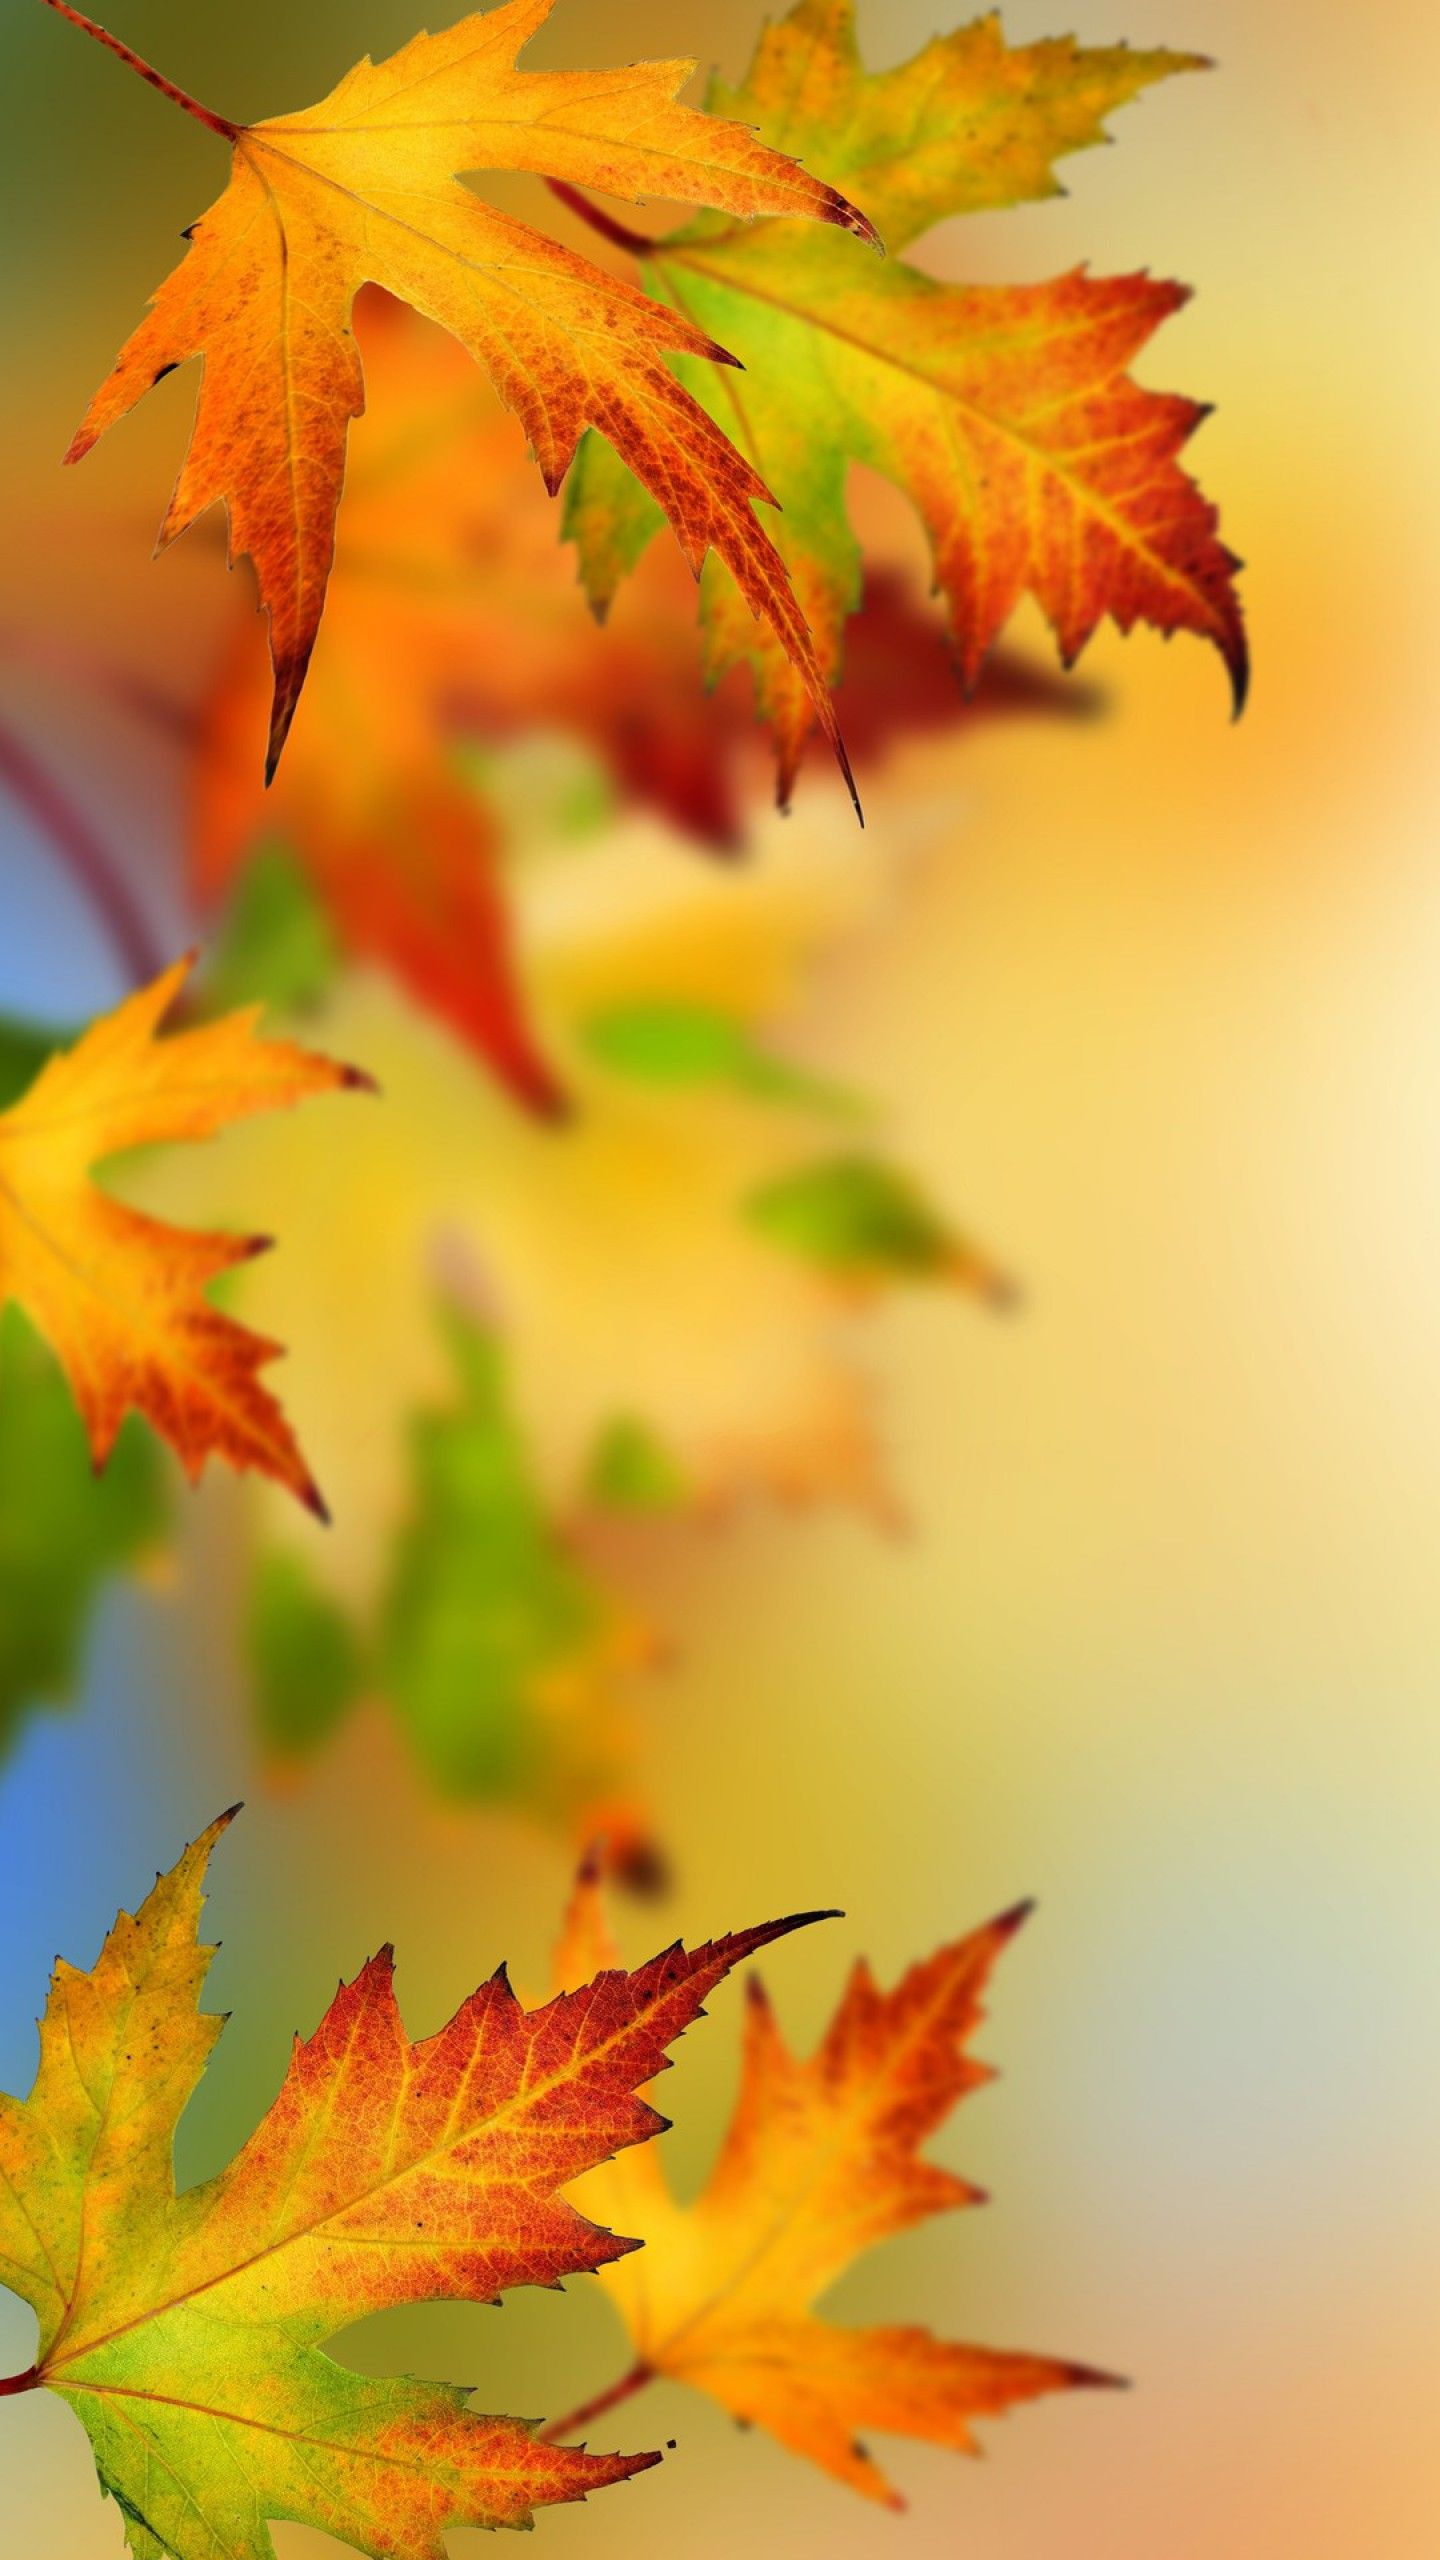 autumn wallpaper for android,leaf,maple leaf,nature,yellow,tree